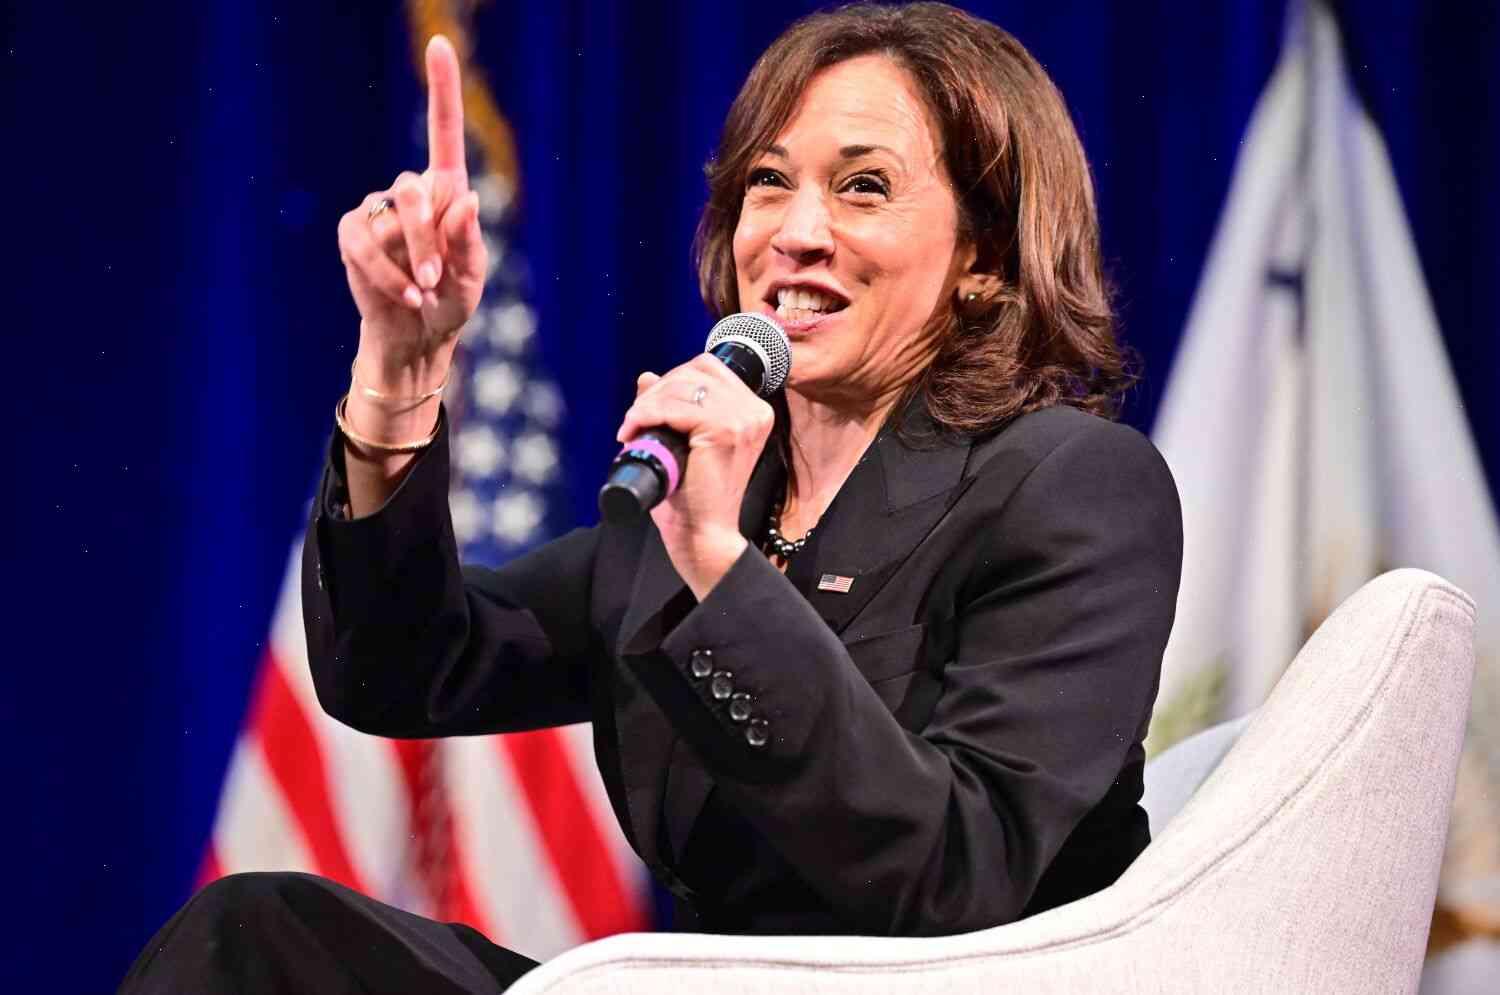 Harris' climate policy is a political battleground for progressive voters